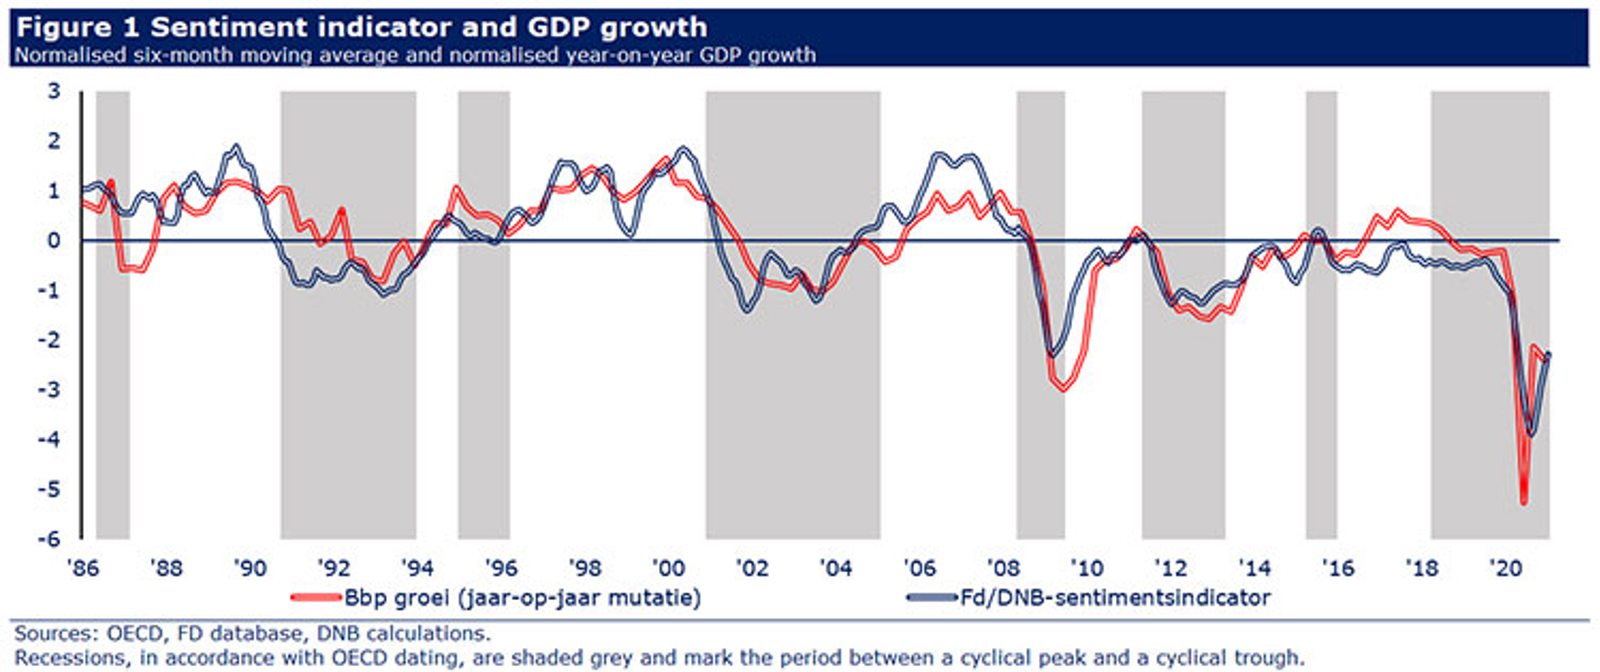 Sentiment indicator and GDP growth